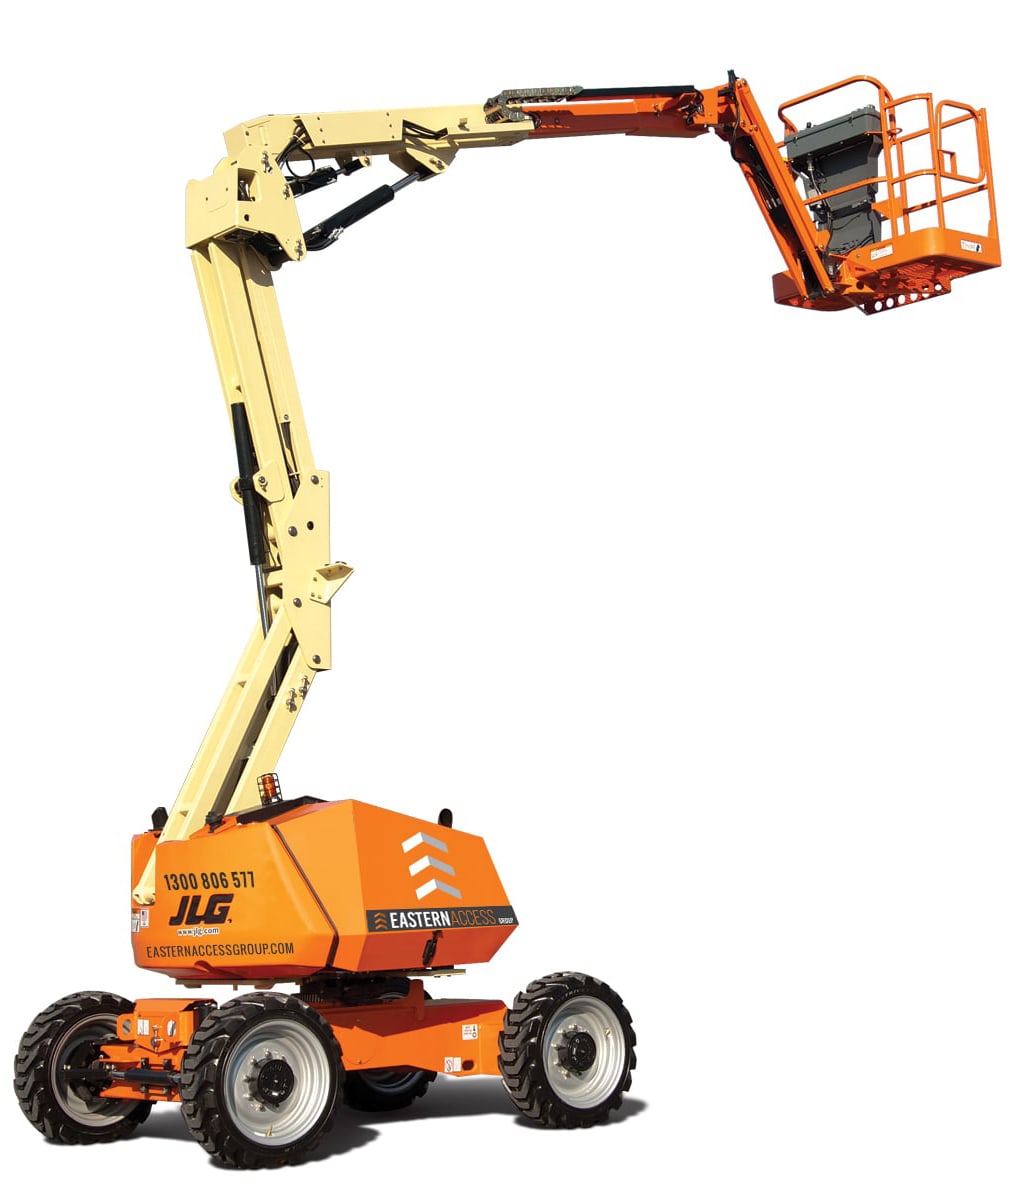 34ft Driveable Knuckle Boom Lift - Eastern Access Group Melbourne